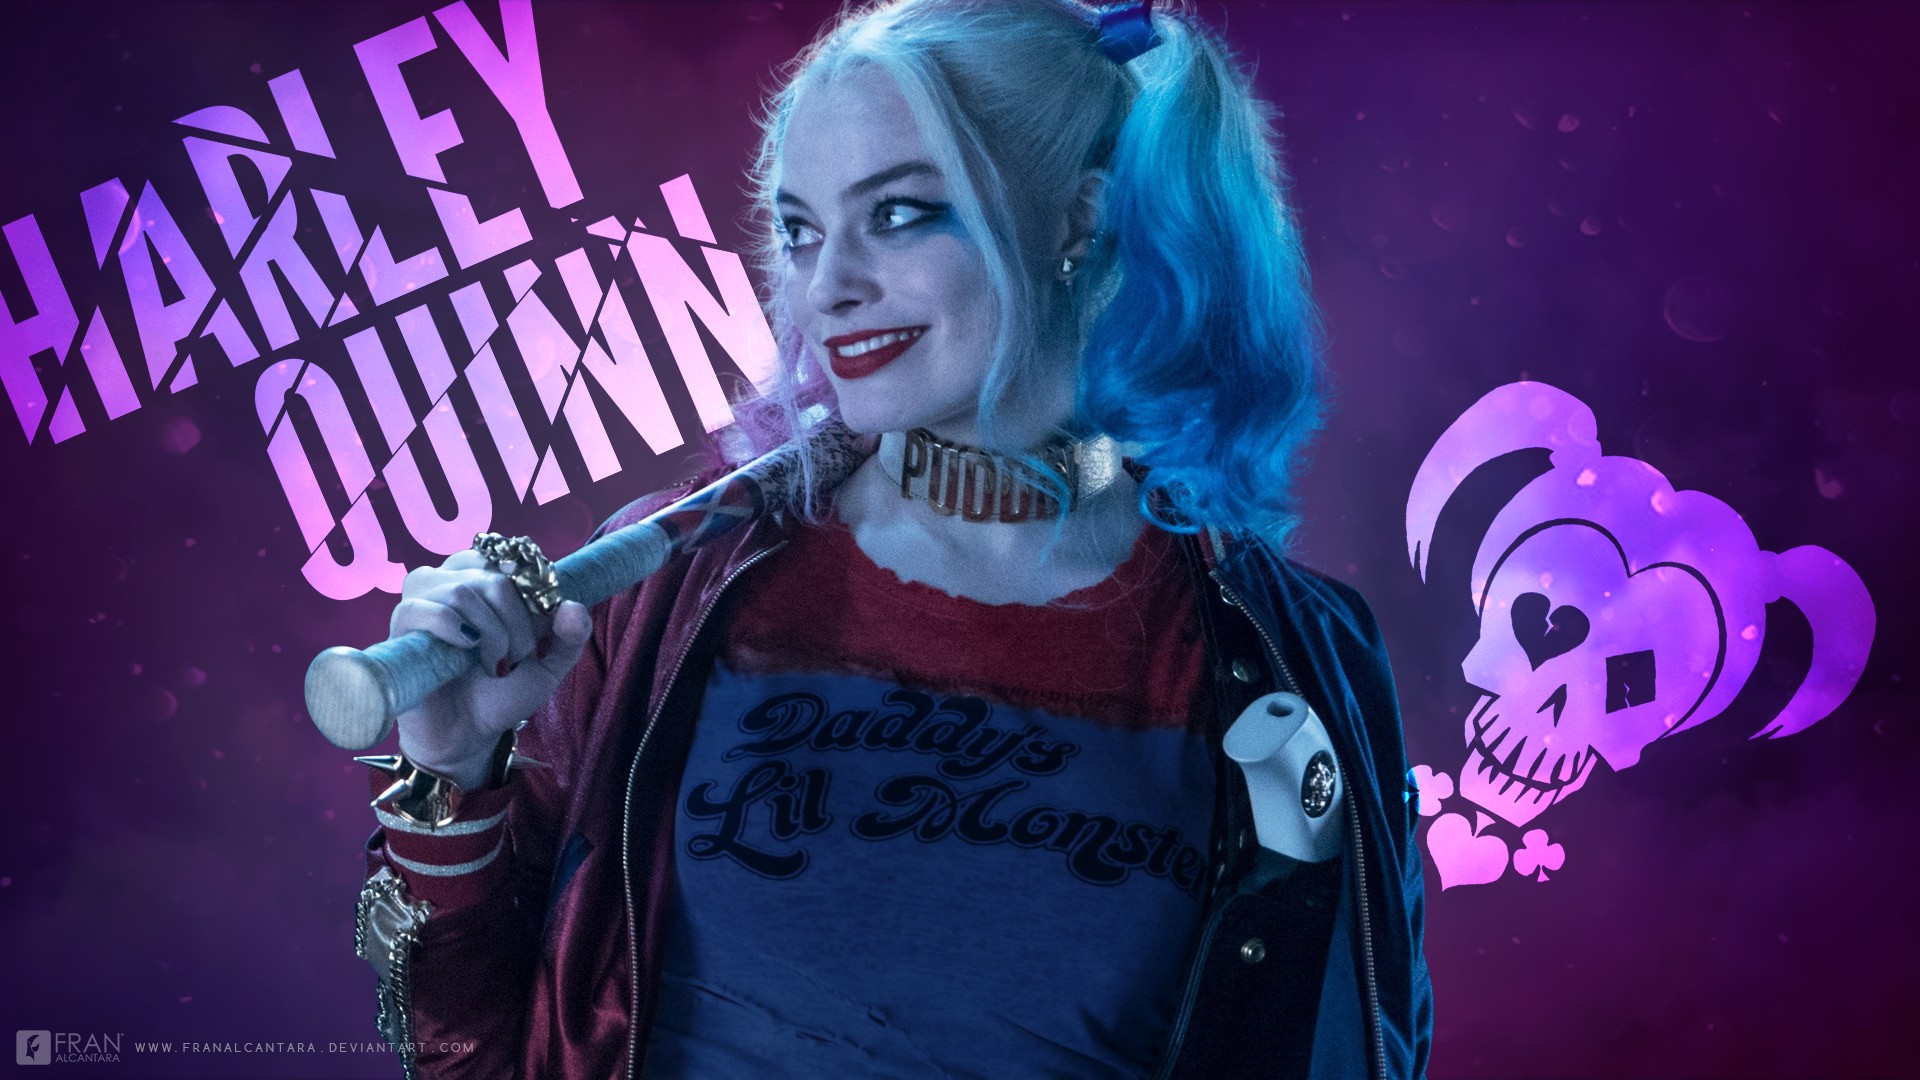 Wallpaper Pictures Of Harley Quinn Desktop with image resolution 1920x1080 pixel. You can use this wallpaper as background for your desktop Computer Screensavers, Android or iPhone smartphones